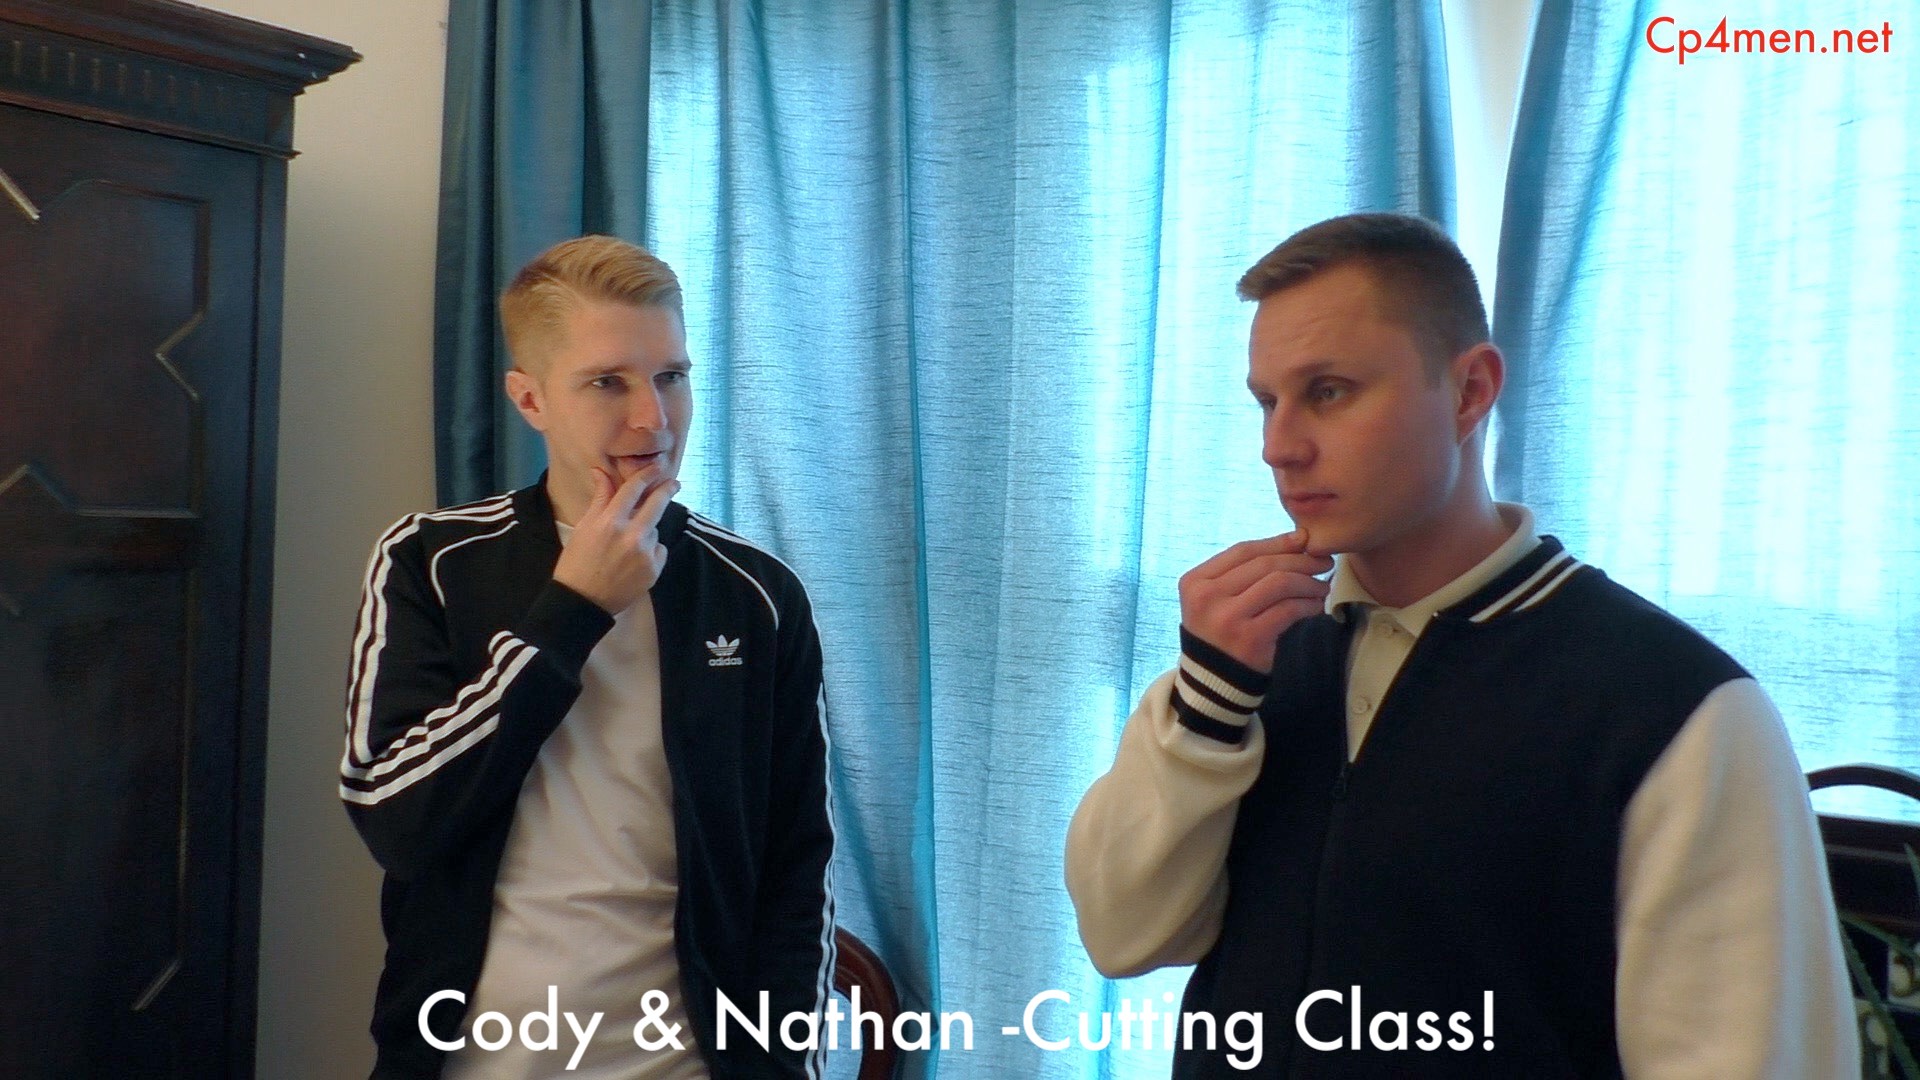 Cp4men Nathan And Cody In “cutting Class” Jock Spank Male Spanking